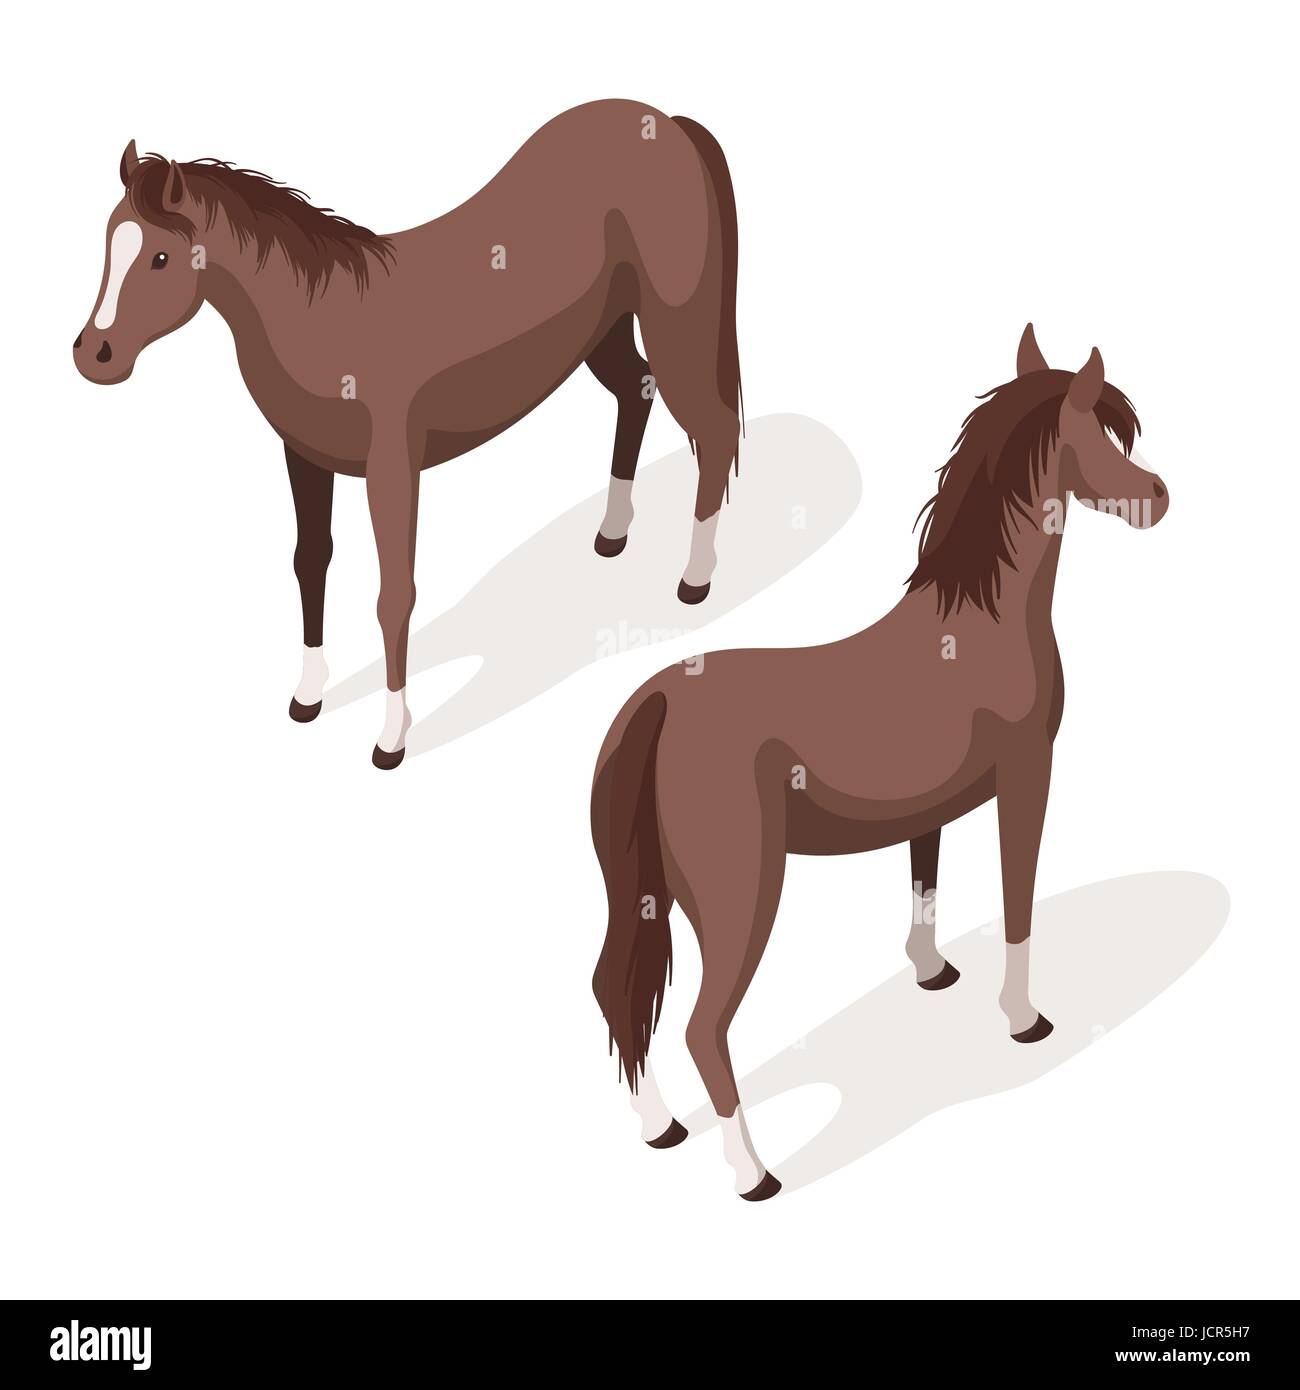 Isometric 3d vector illustration of brown sorrel horses. Back and front view. Icon for web. Isolated on white background. Stock Vector